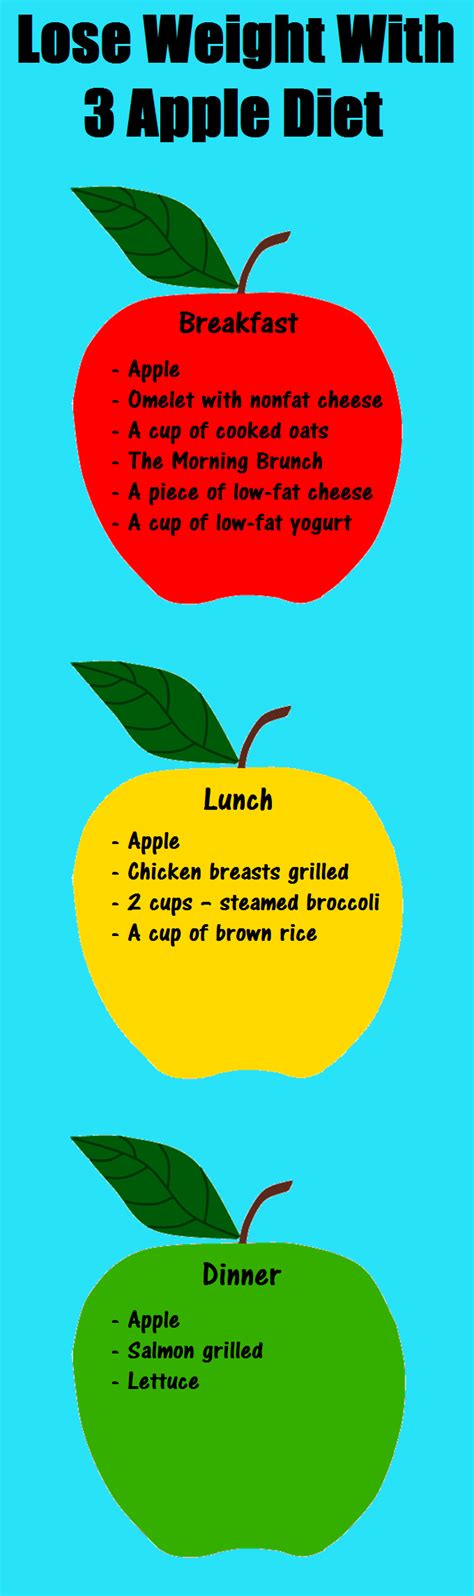 Diet Plan 3 apples a day was designed by an American nutritionist Temi Flynn. | Диета